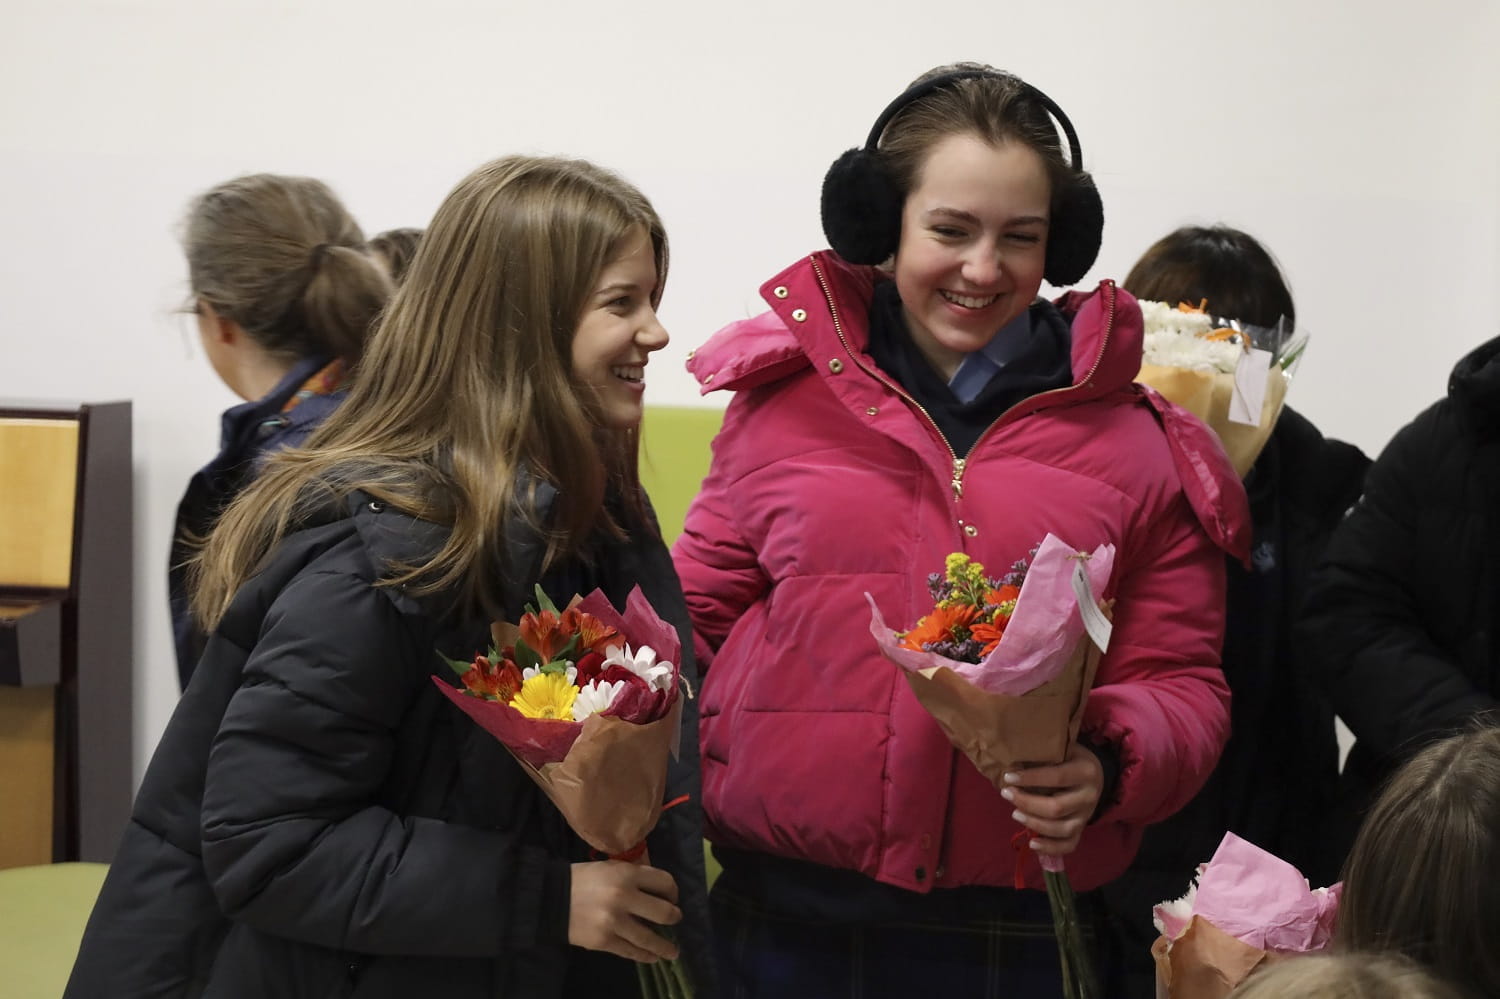 Students giving flowers